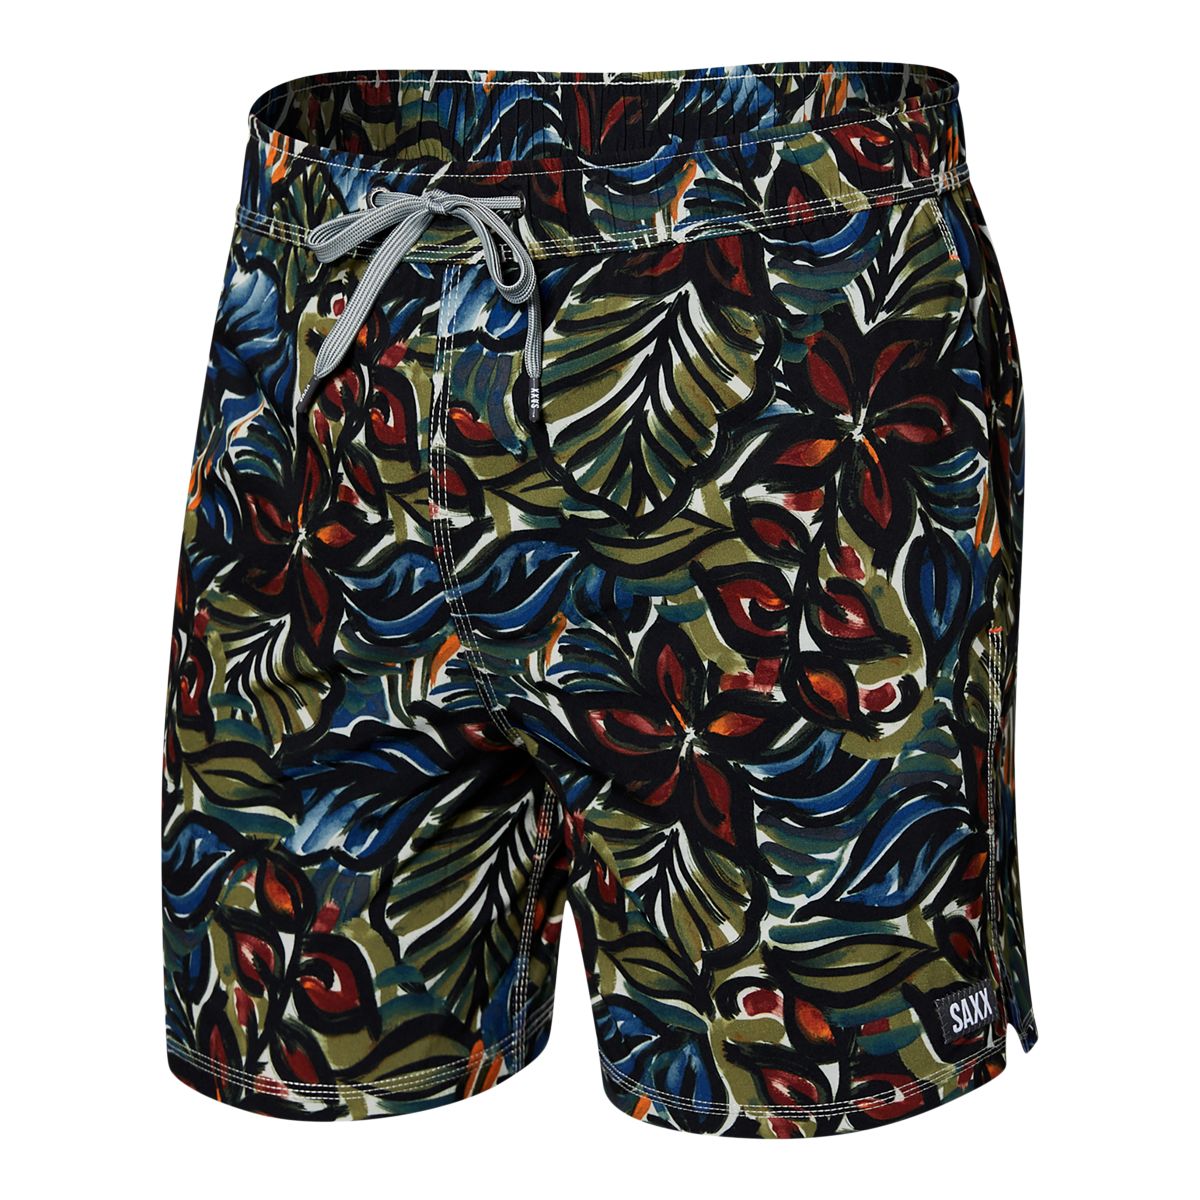 Saxx Men's Oh Buoy 2 in 1 Swim Volley Shorts, 7